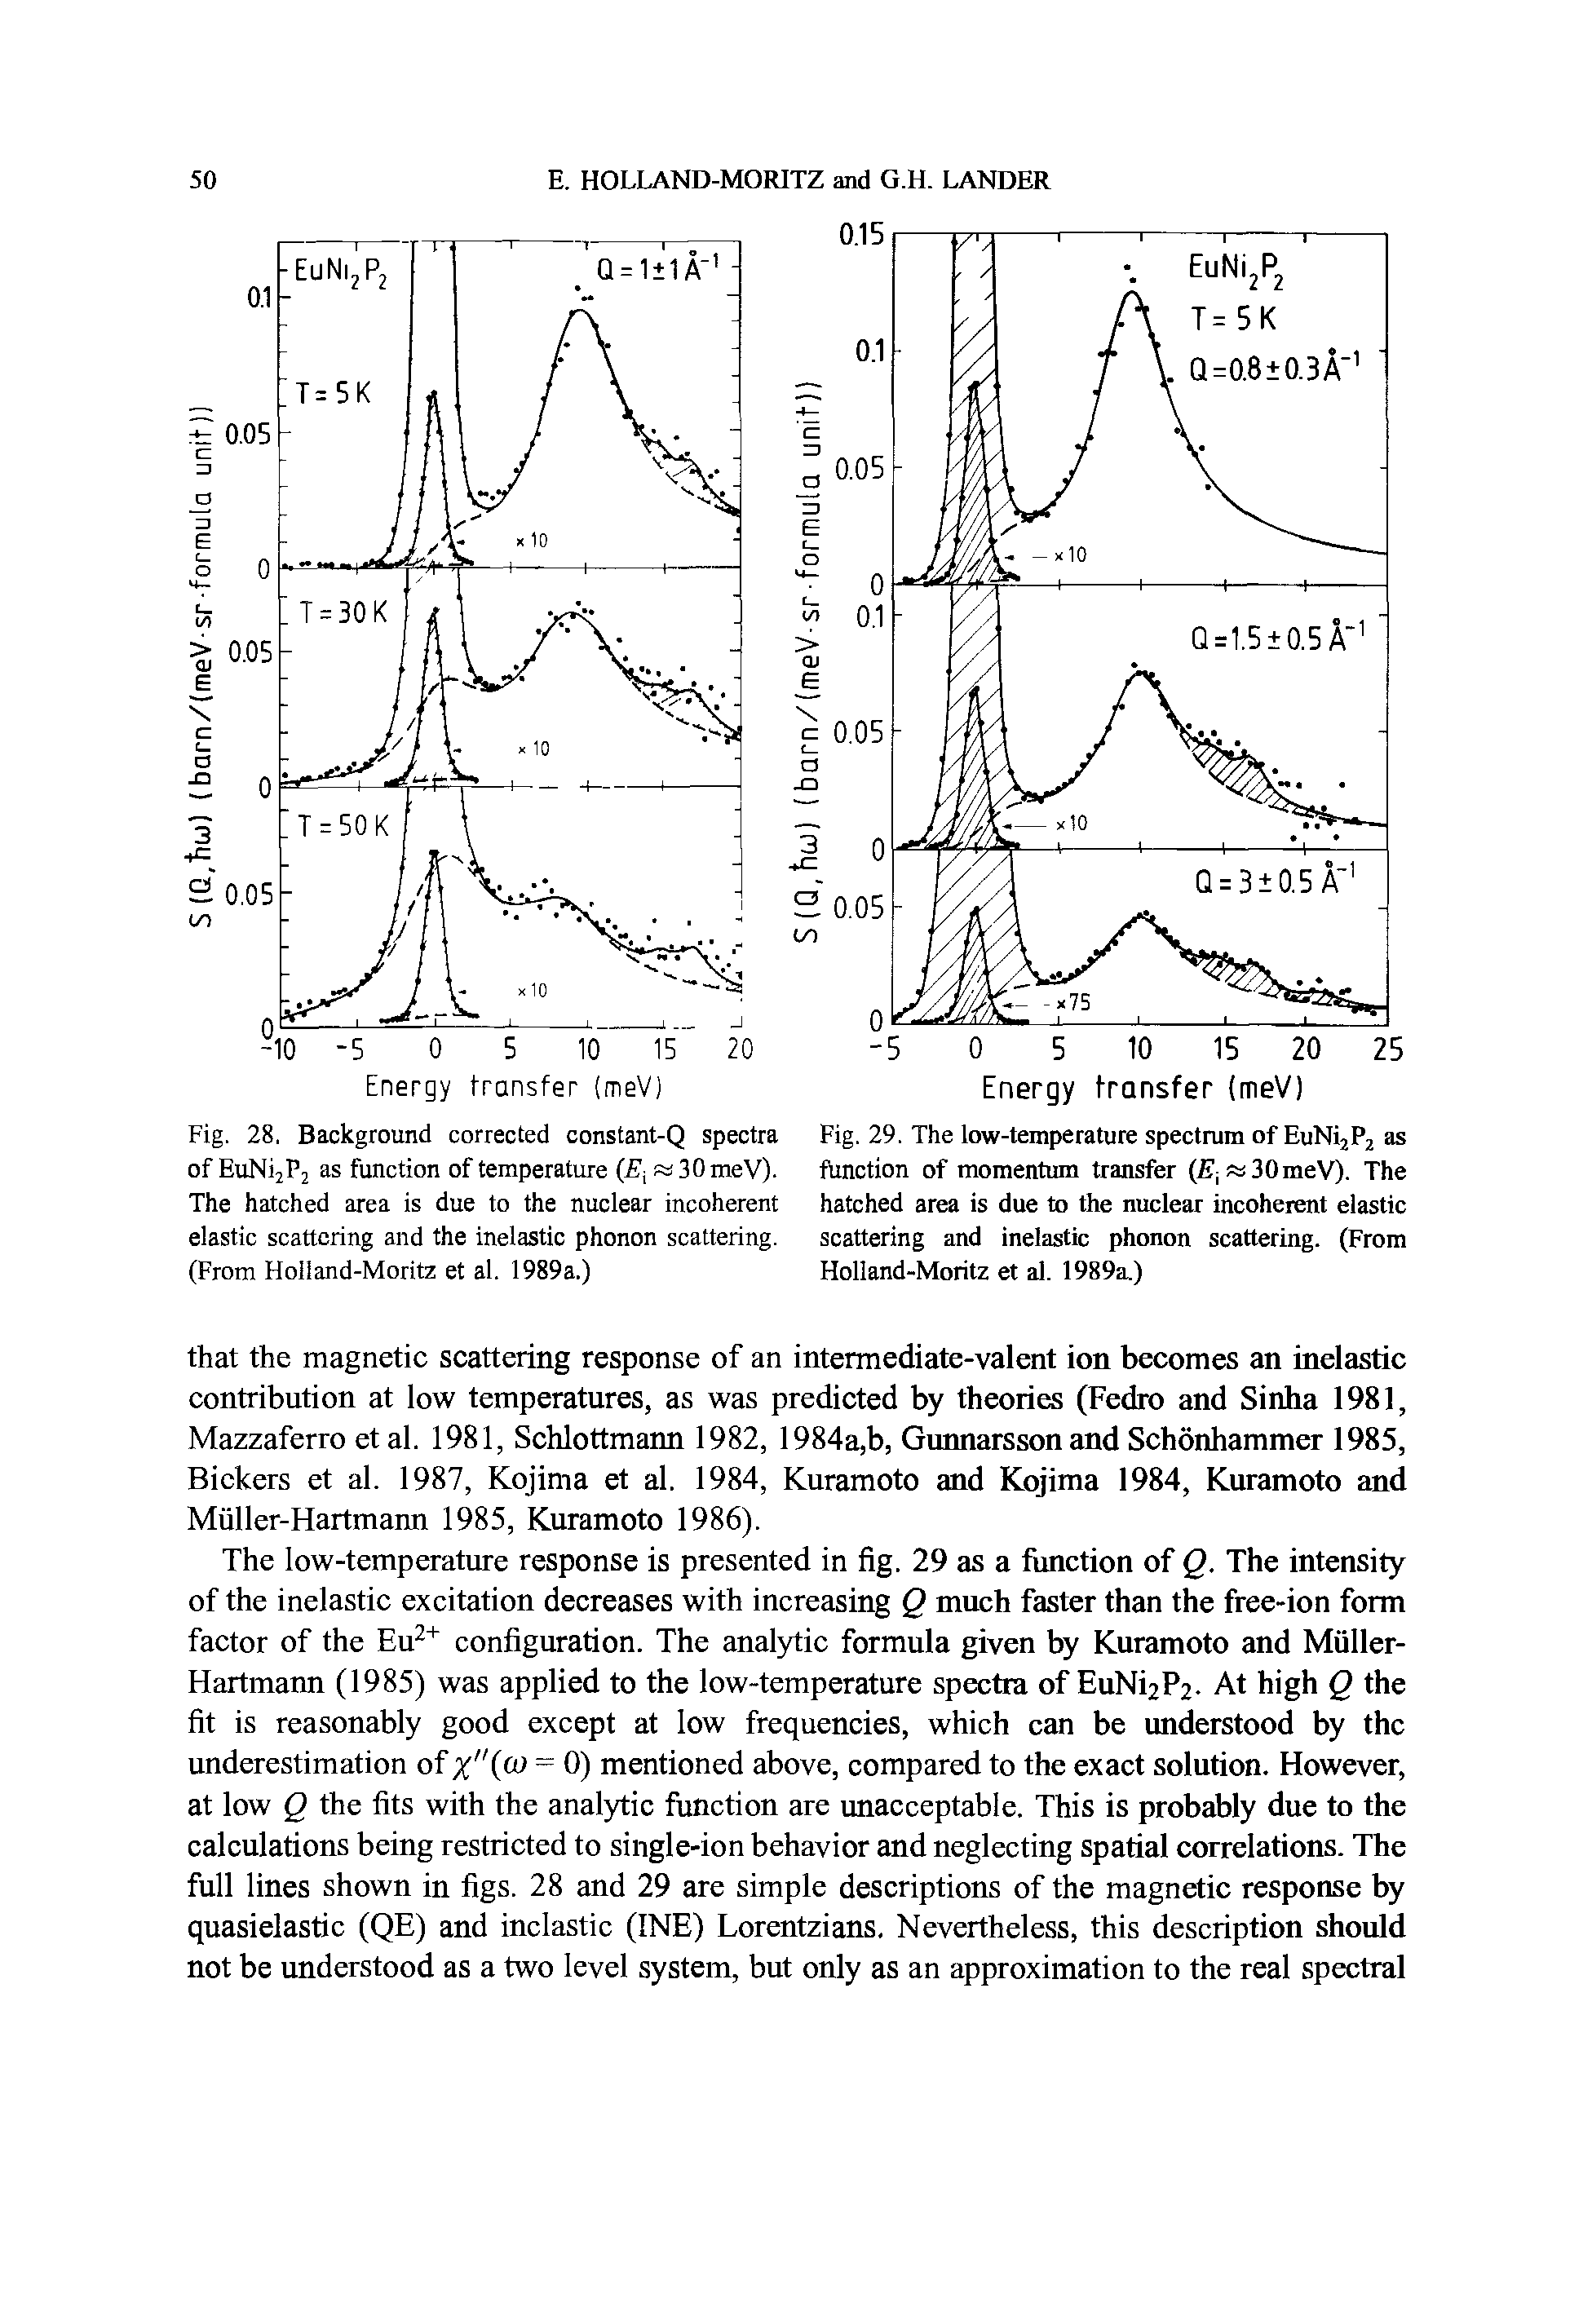 Fig. 29. The low-temperature spectrum of EuNi P as function of momentum transfer ( j i30meV). The hatched area is due to the nuclear incoherent elastic scattering and inelastic phonon scattering. (From Holland-Moritz et al. 1989a.)...